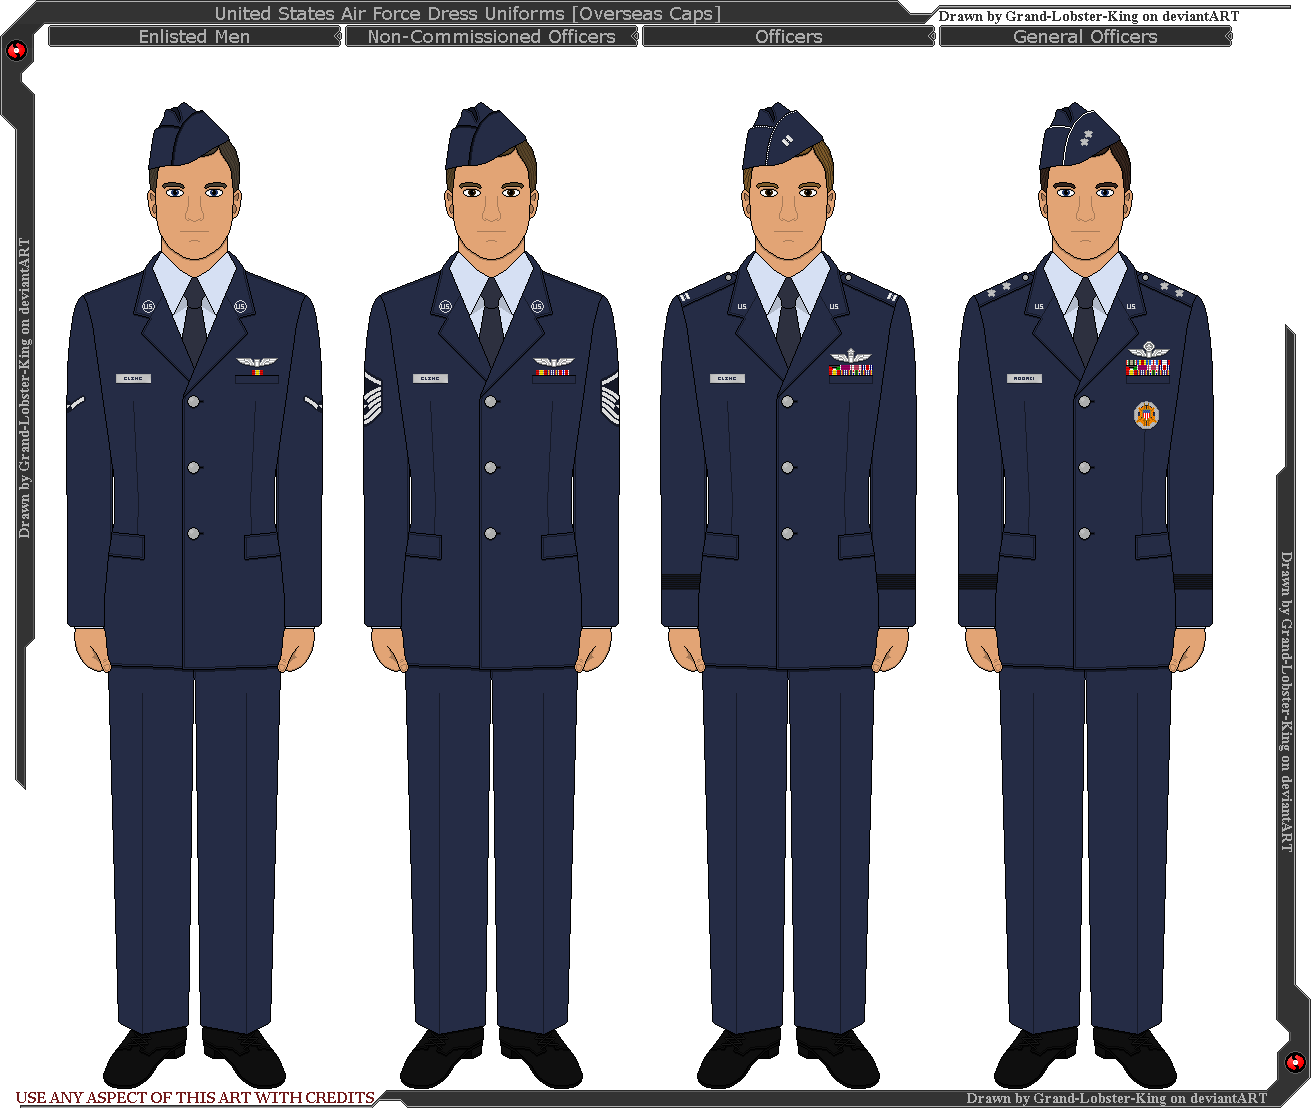 Uniforms of the United States Air Force - Wikipedia